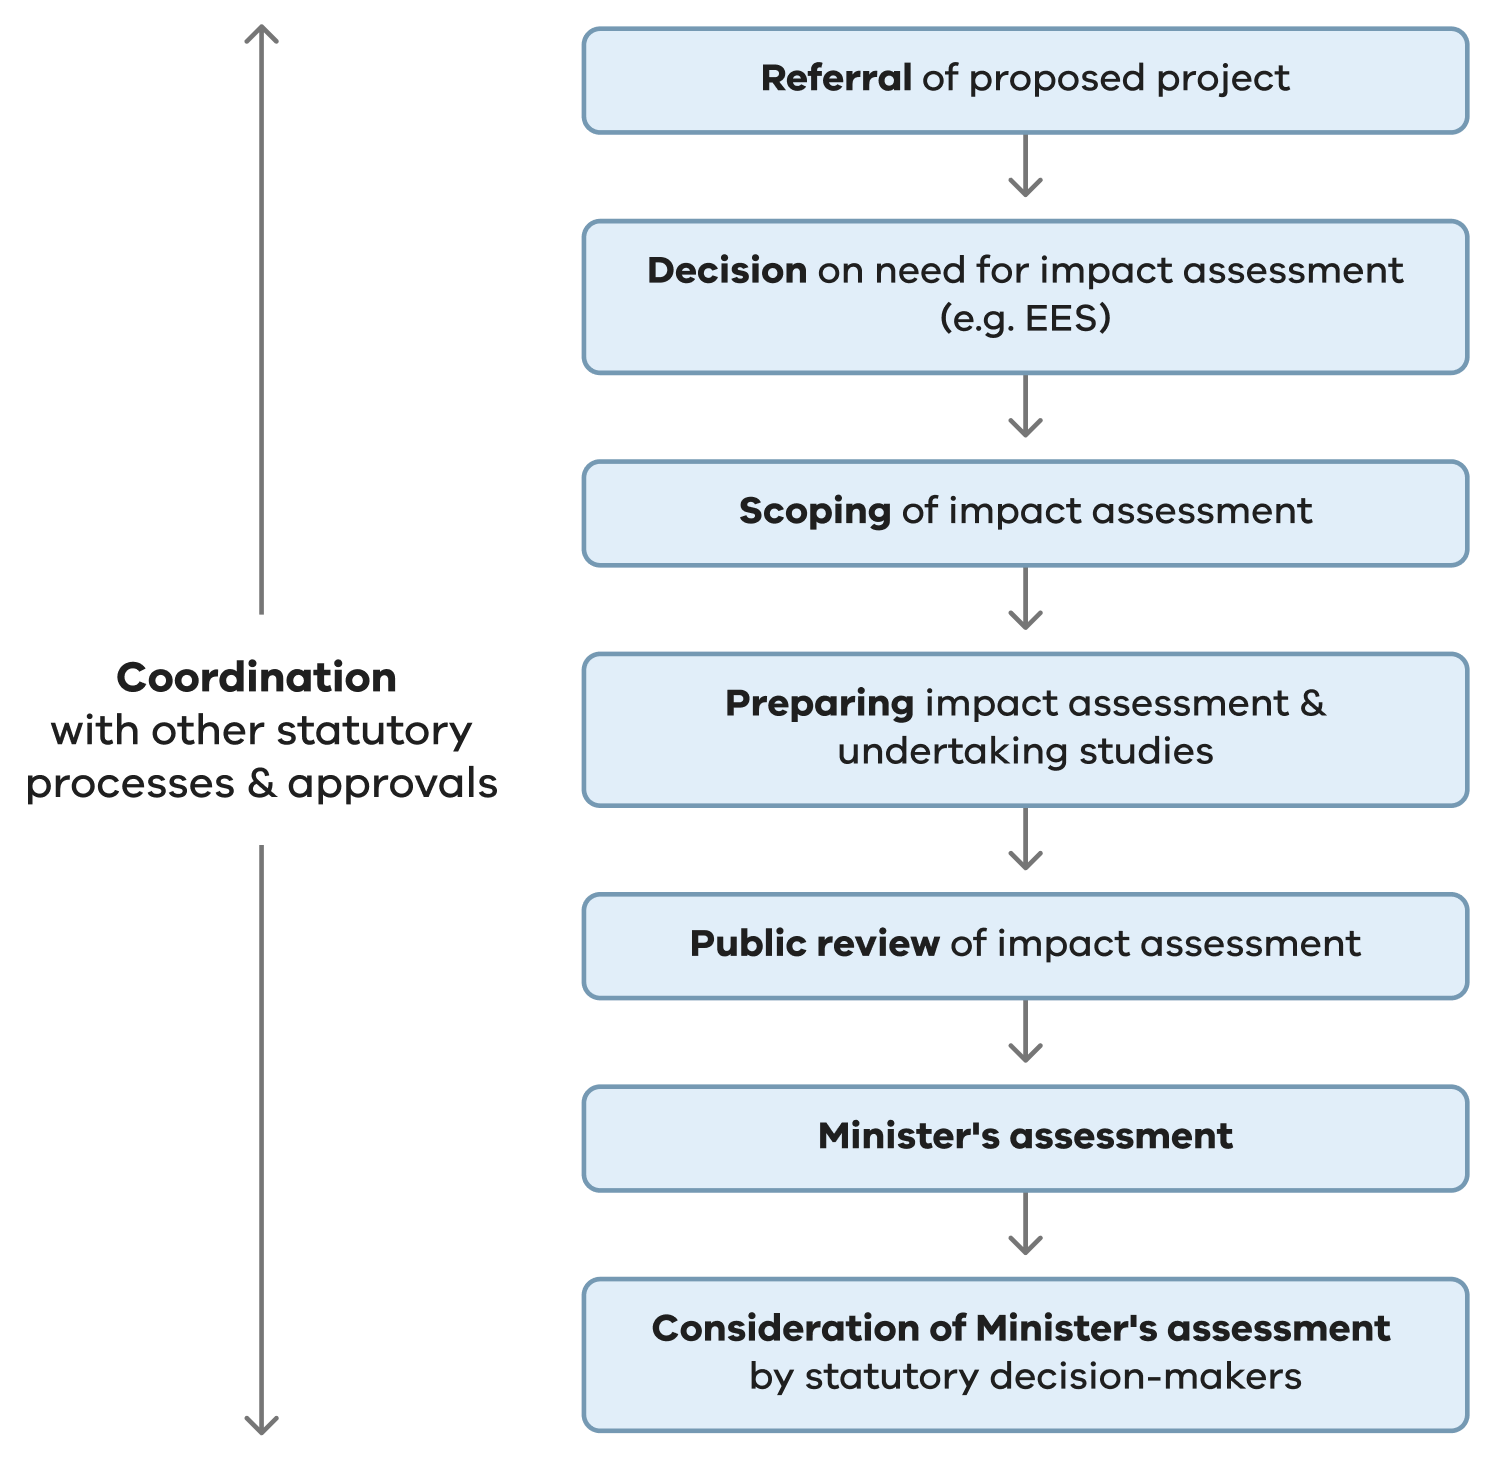 Figure 1. Overview of processes under the Environment Effects Act